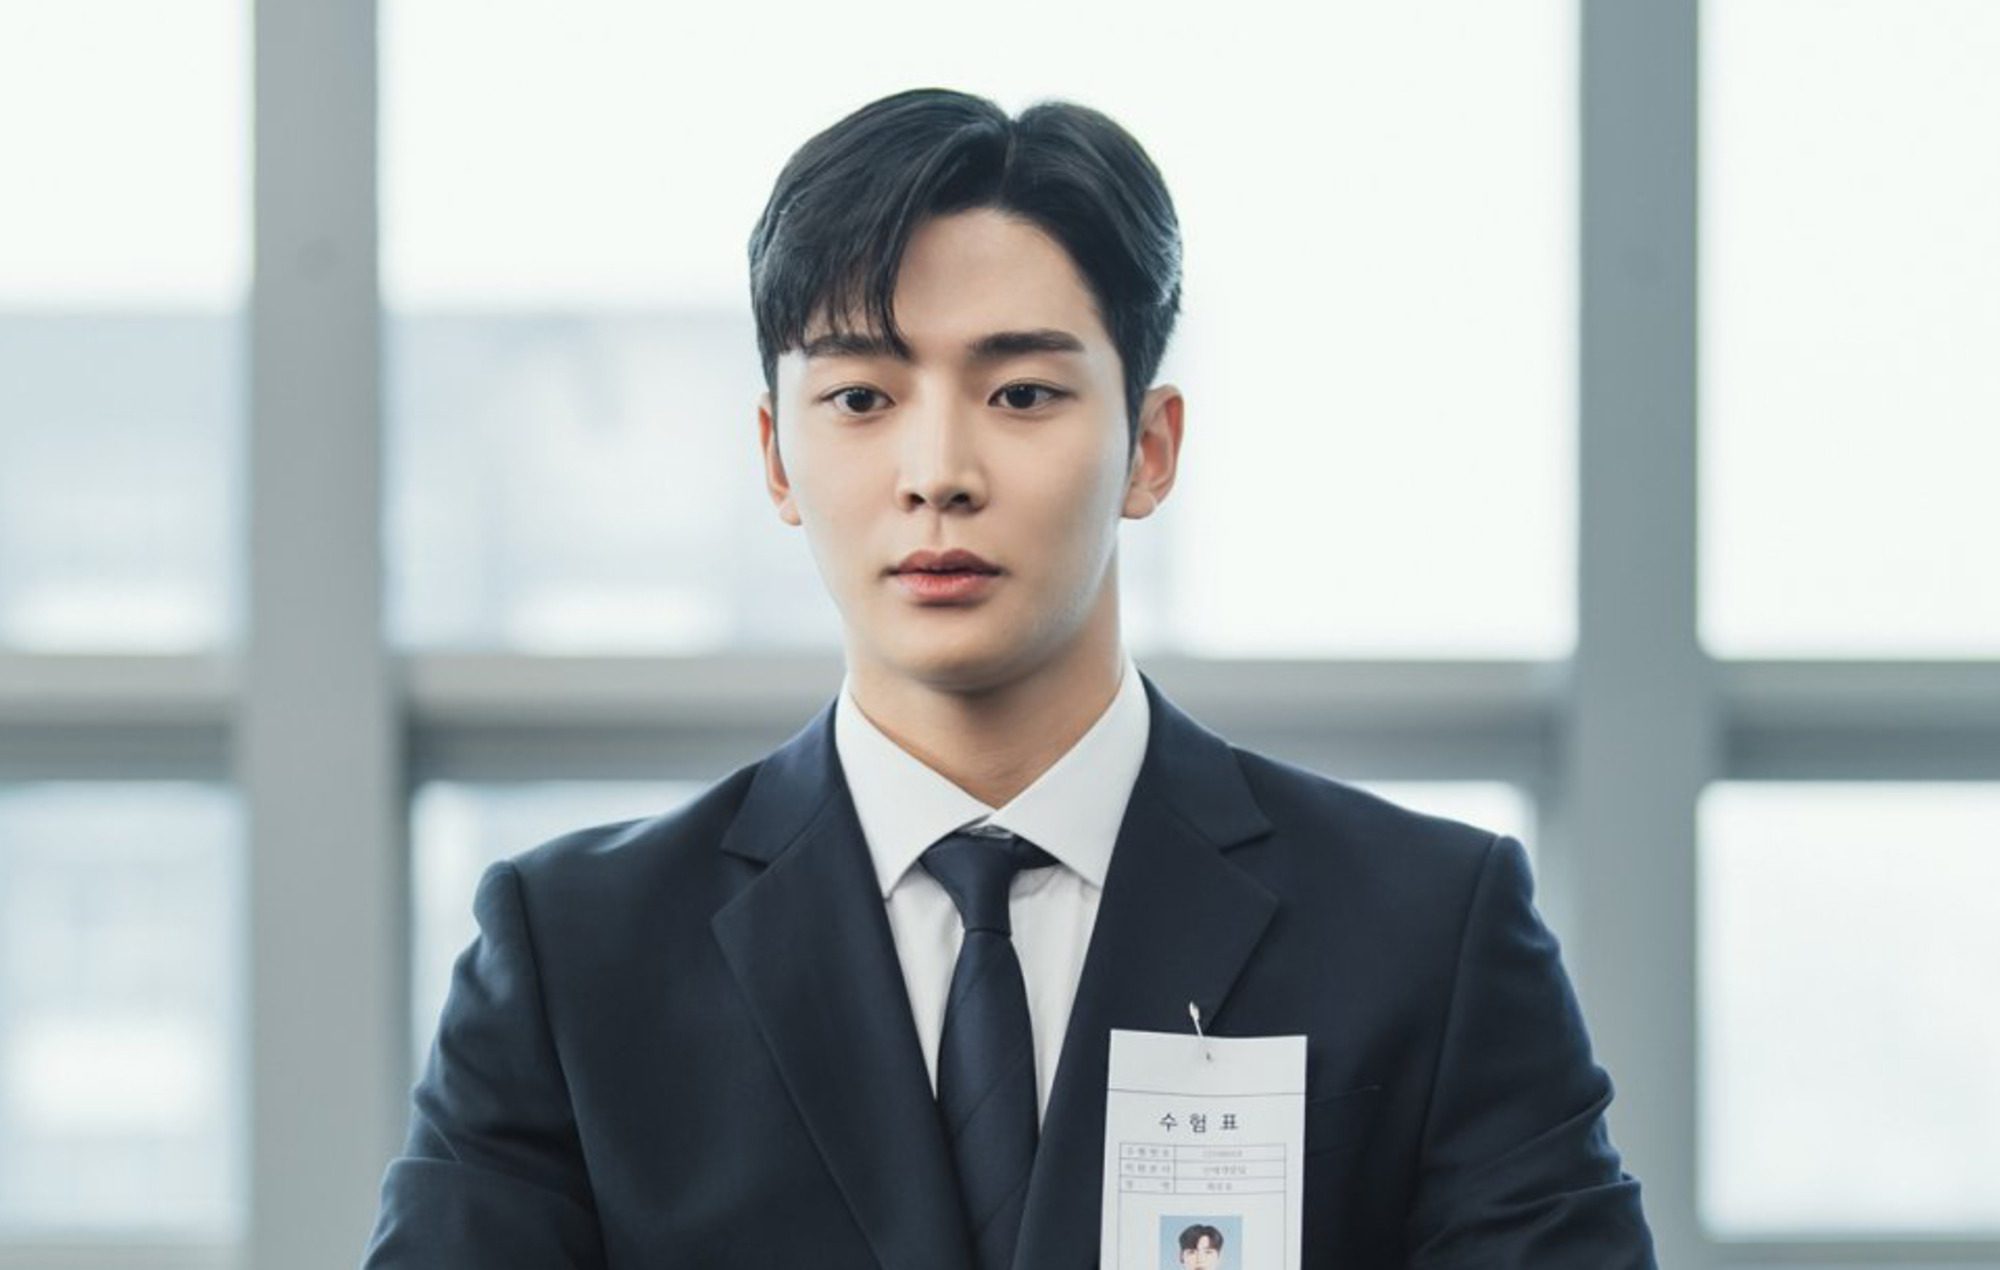 Who Is SF9 Rowoon Dating In 2022?